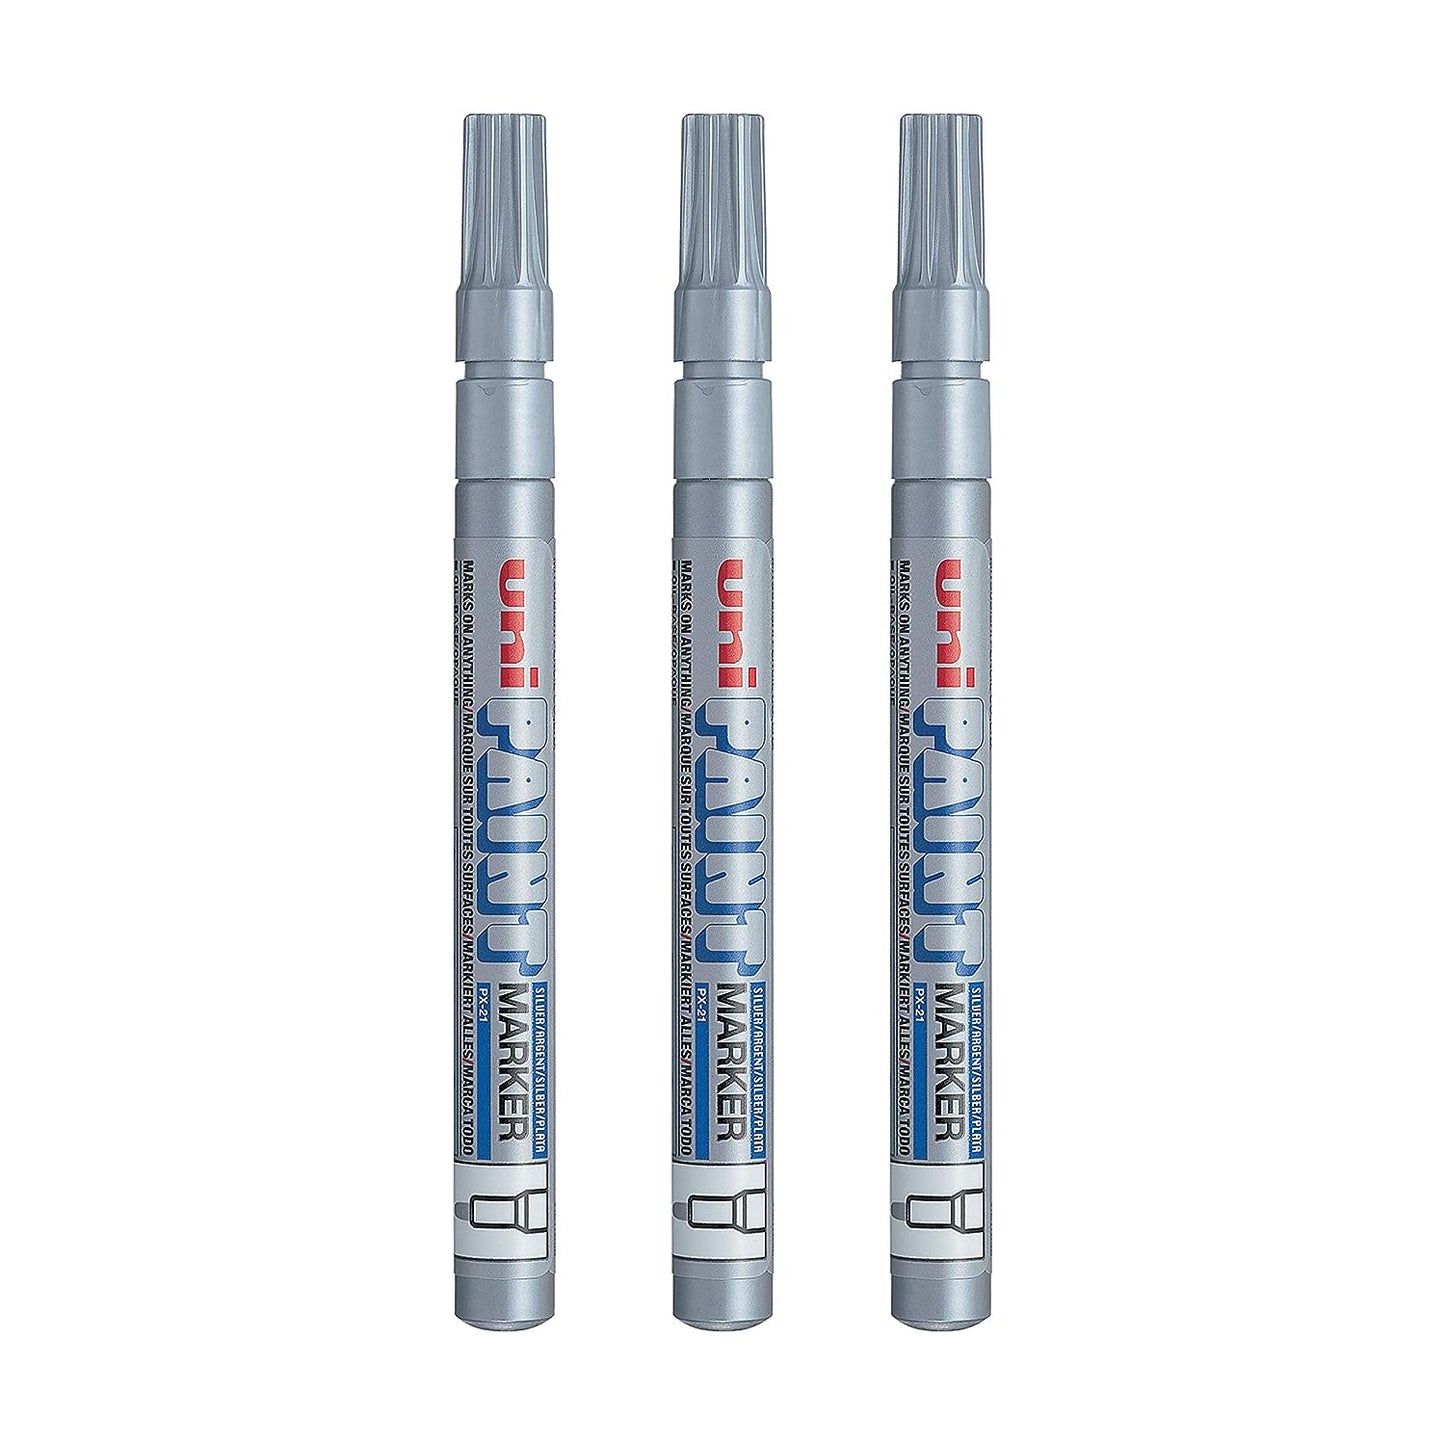 Uniball Px21 Paint Markers - Silver